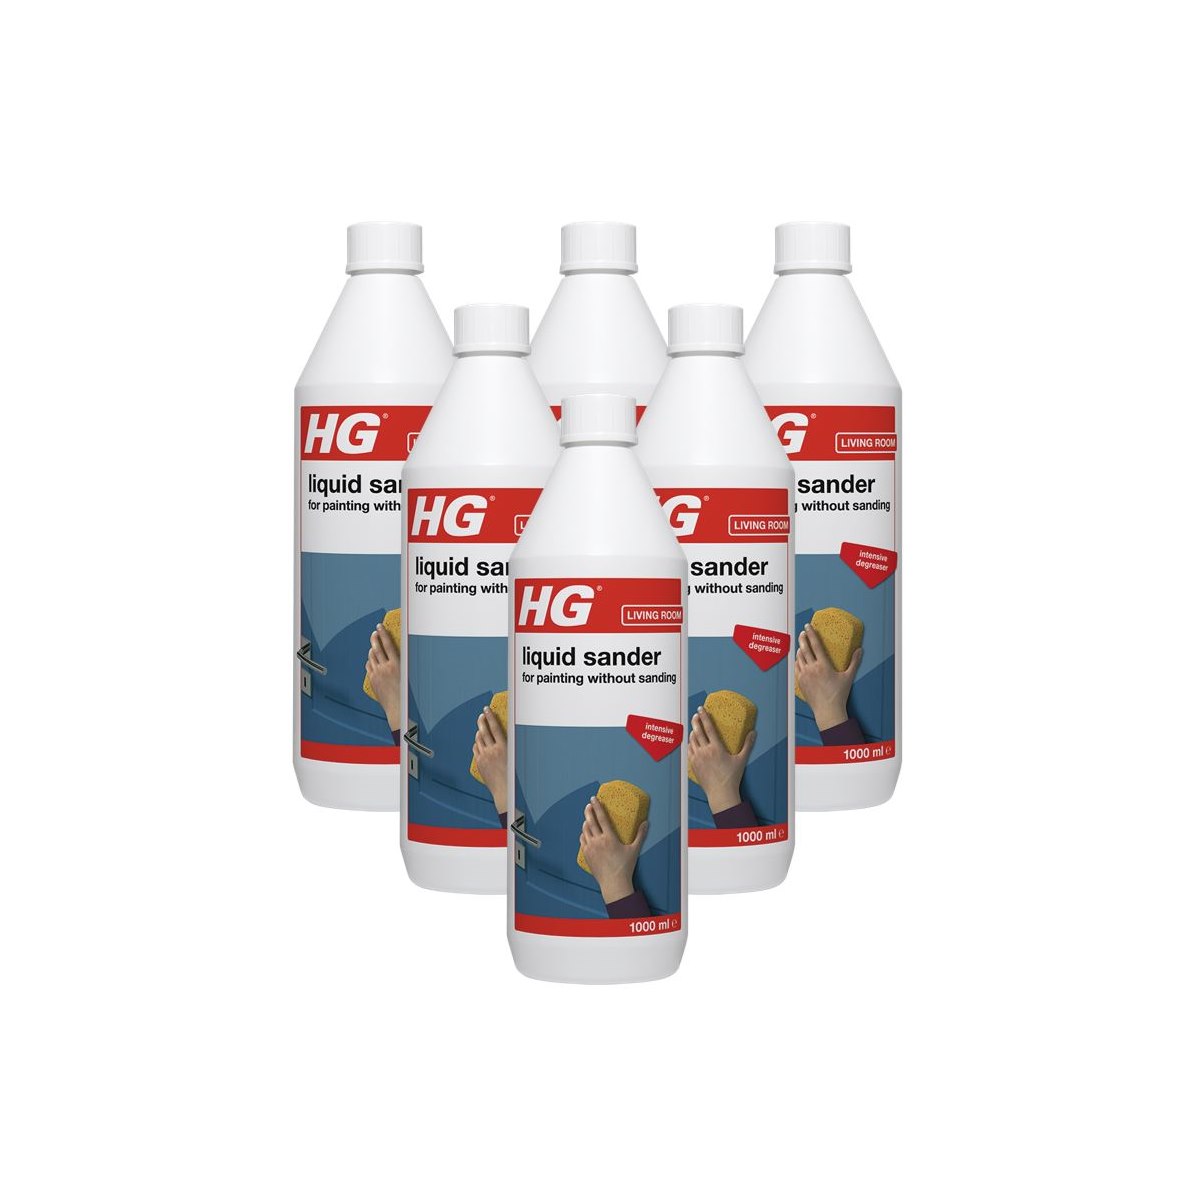 Case of 6 x HG Liquid Sander For Painting Without Sanding 1 Litre